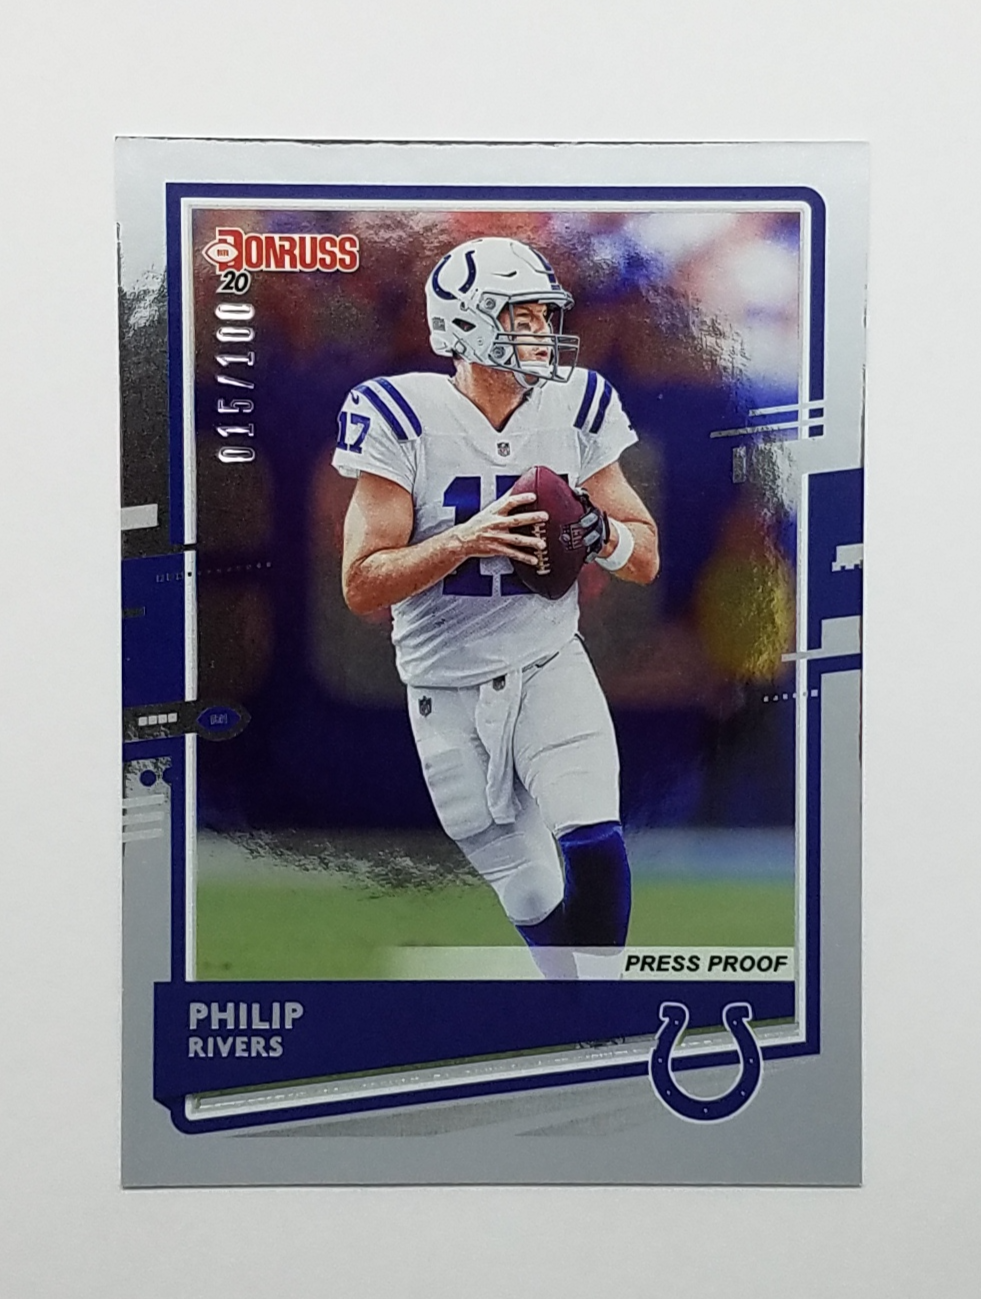 2020 Donruss Press Proof Silver Parallel 15/100 Philip Rivers Colts Football Card